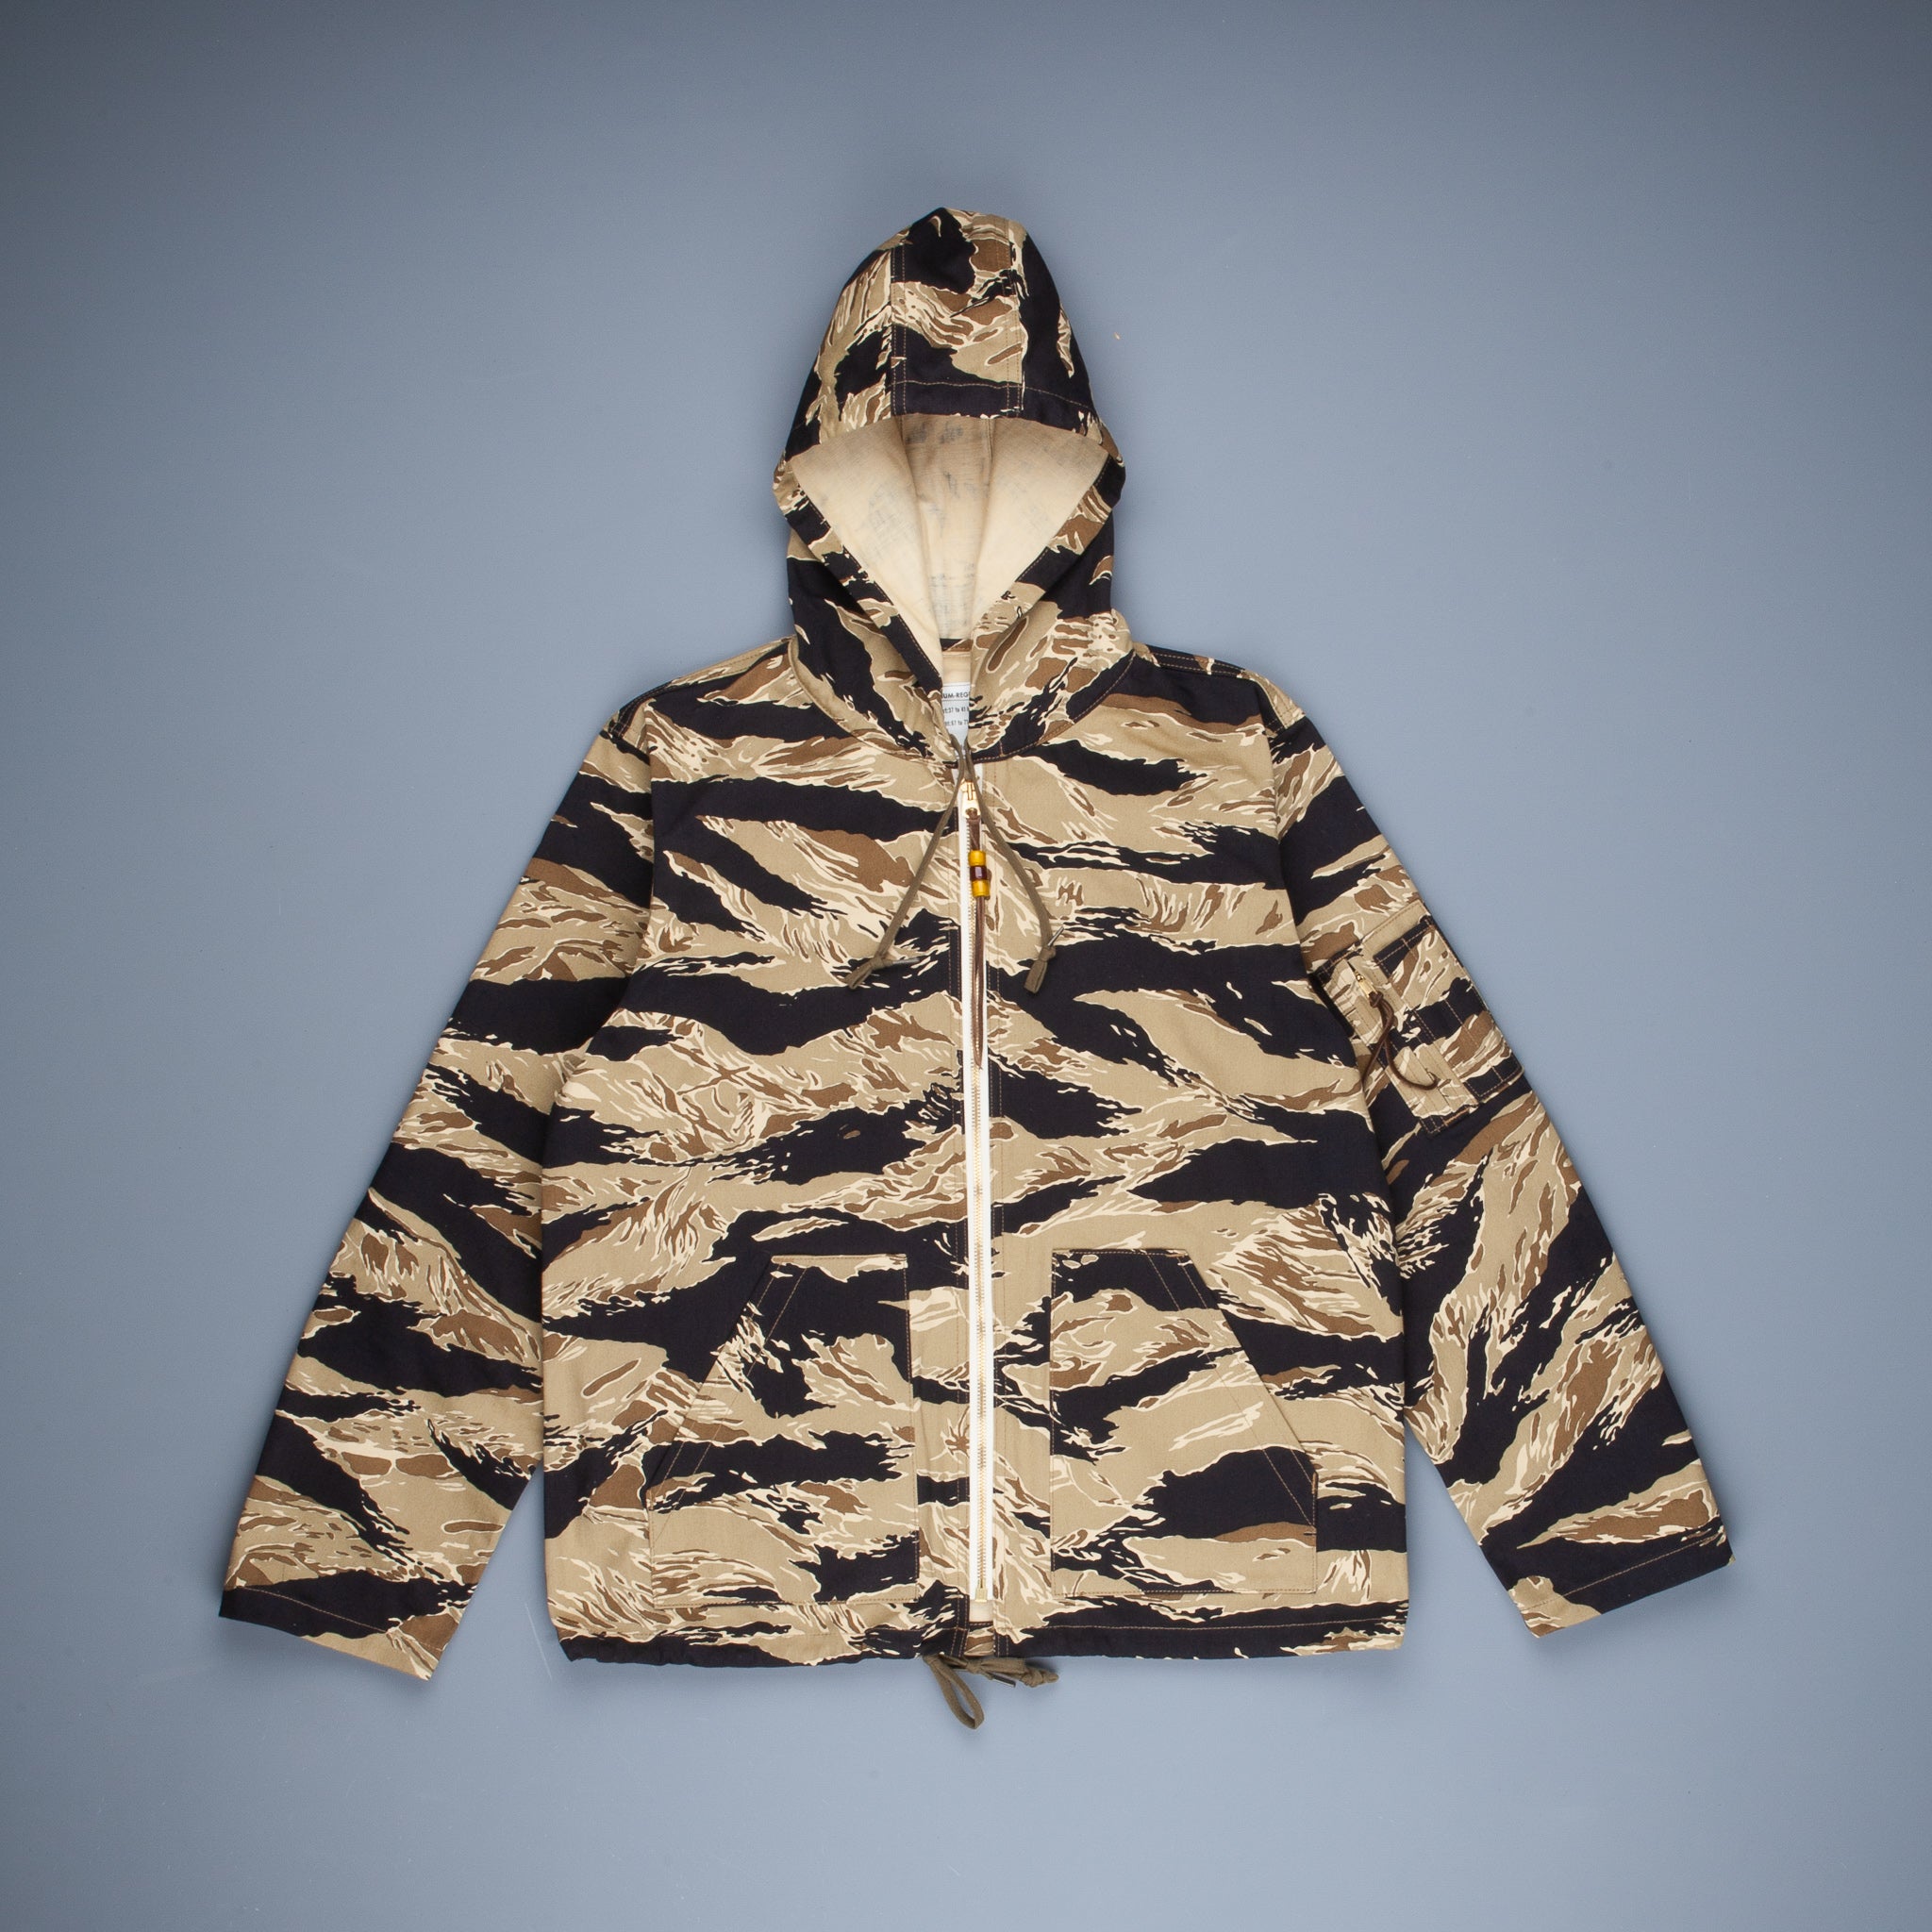 THE REAL McCOY'S COAT, MAN'S, CAMOUFLAGE